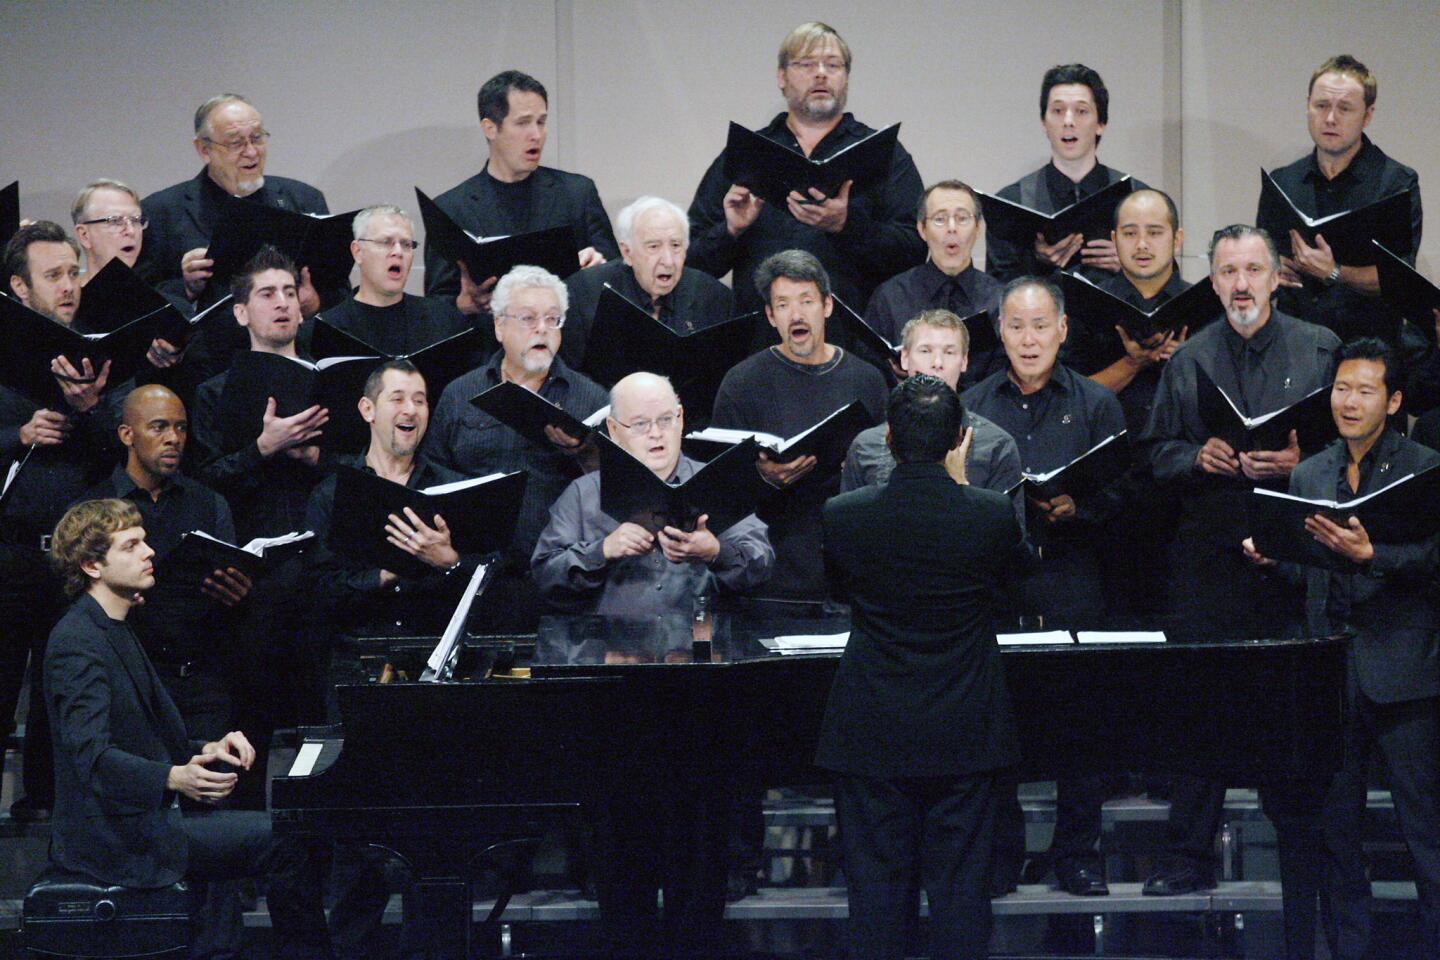 Members of the Gay Men's Chorus of Los Angeles perform at Glendale High School on Thursday, March 15, 2012. There are 215 members in the choir and was founded in 1979. They will be performing March 24 and 25 at the First Congregational Church in Korea town. Levi Kreis and John West will be featured in the performance as well.